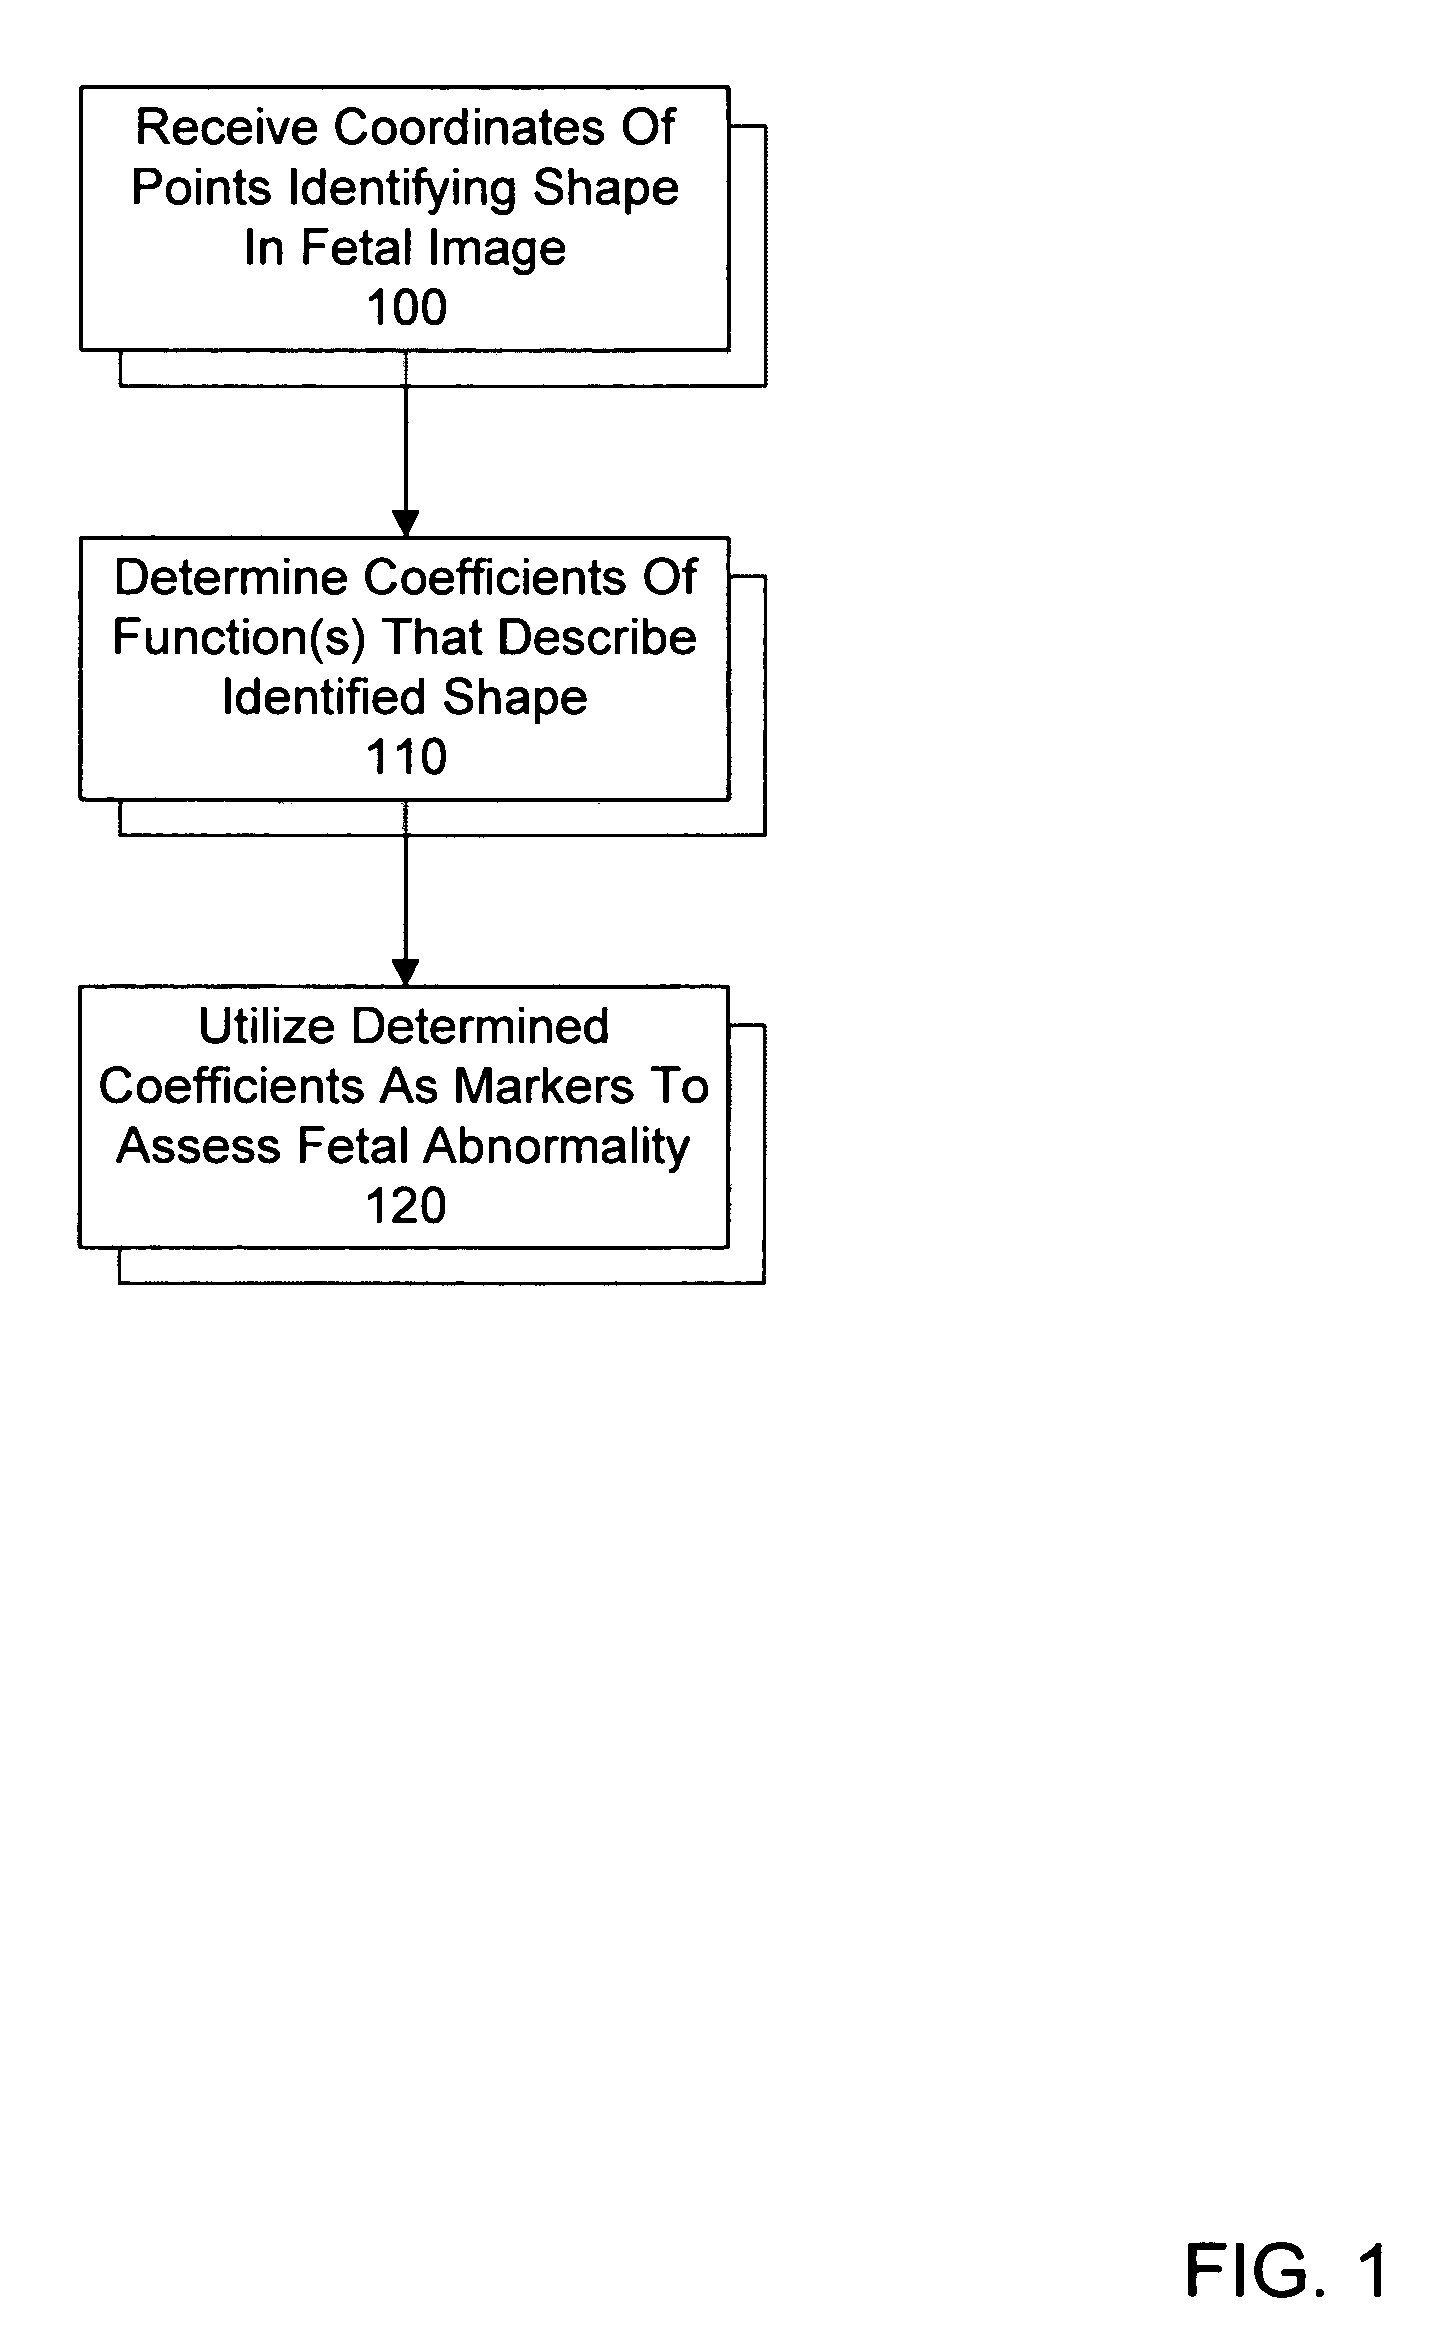 System and method for utilizing shape analysis to assess fetal abnormality